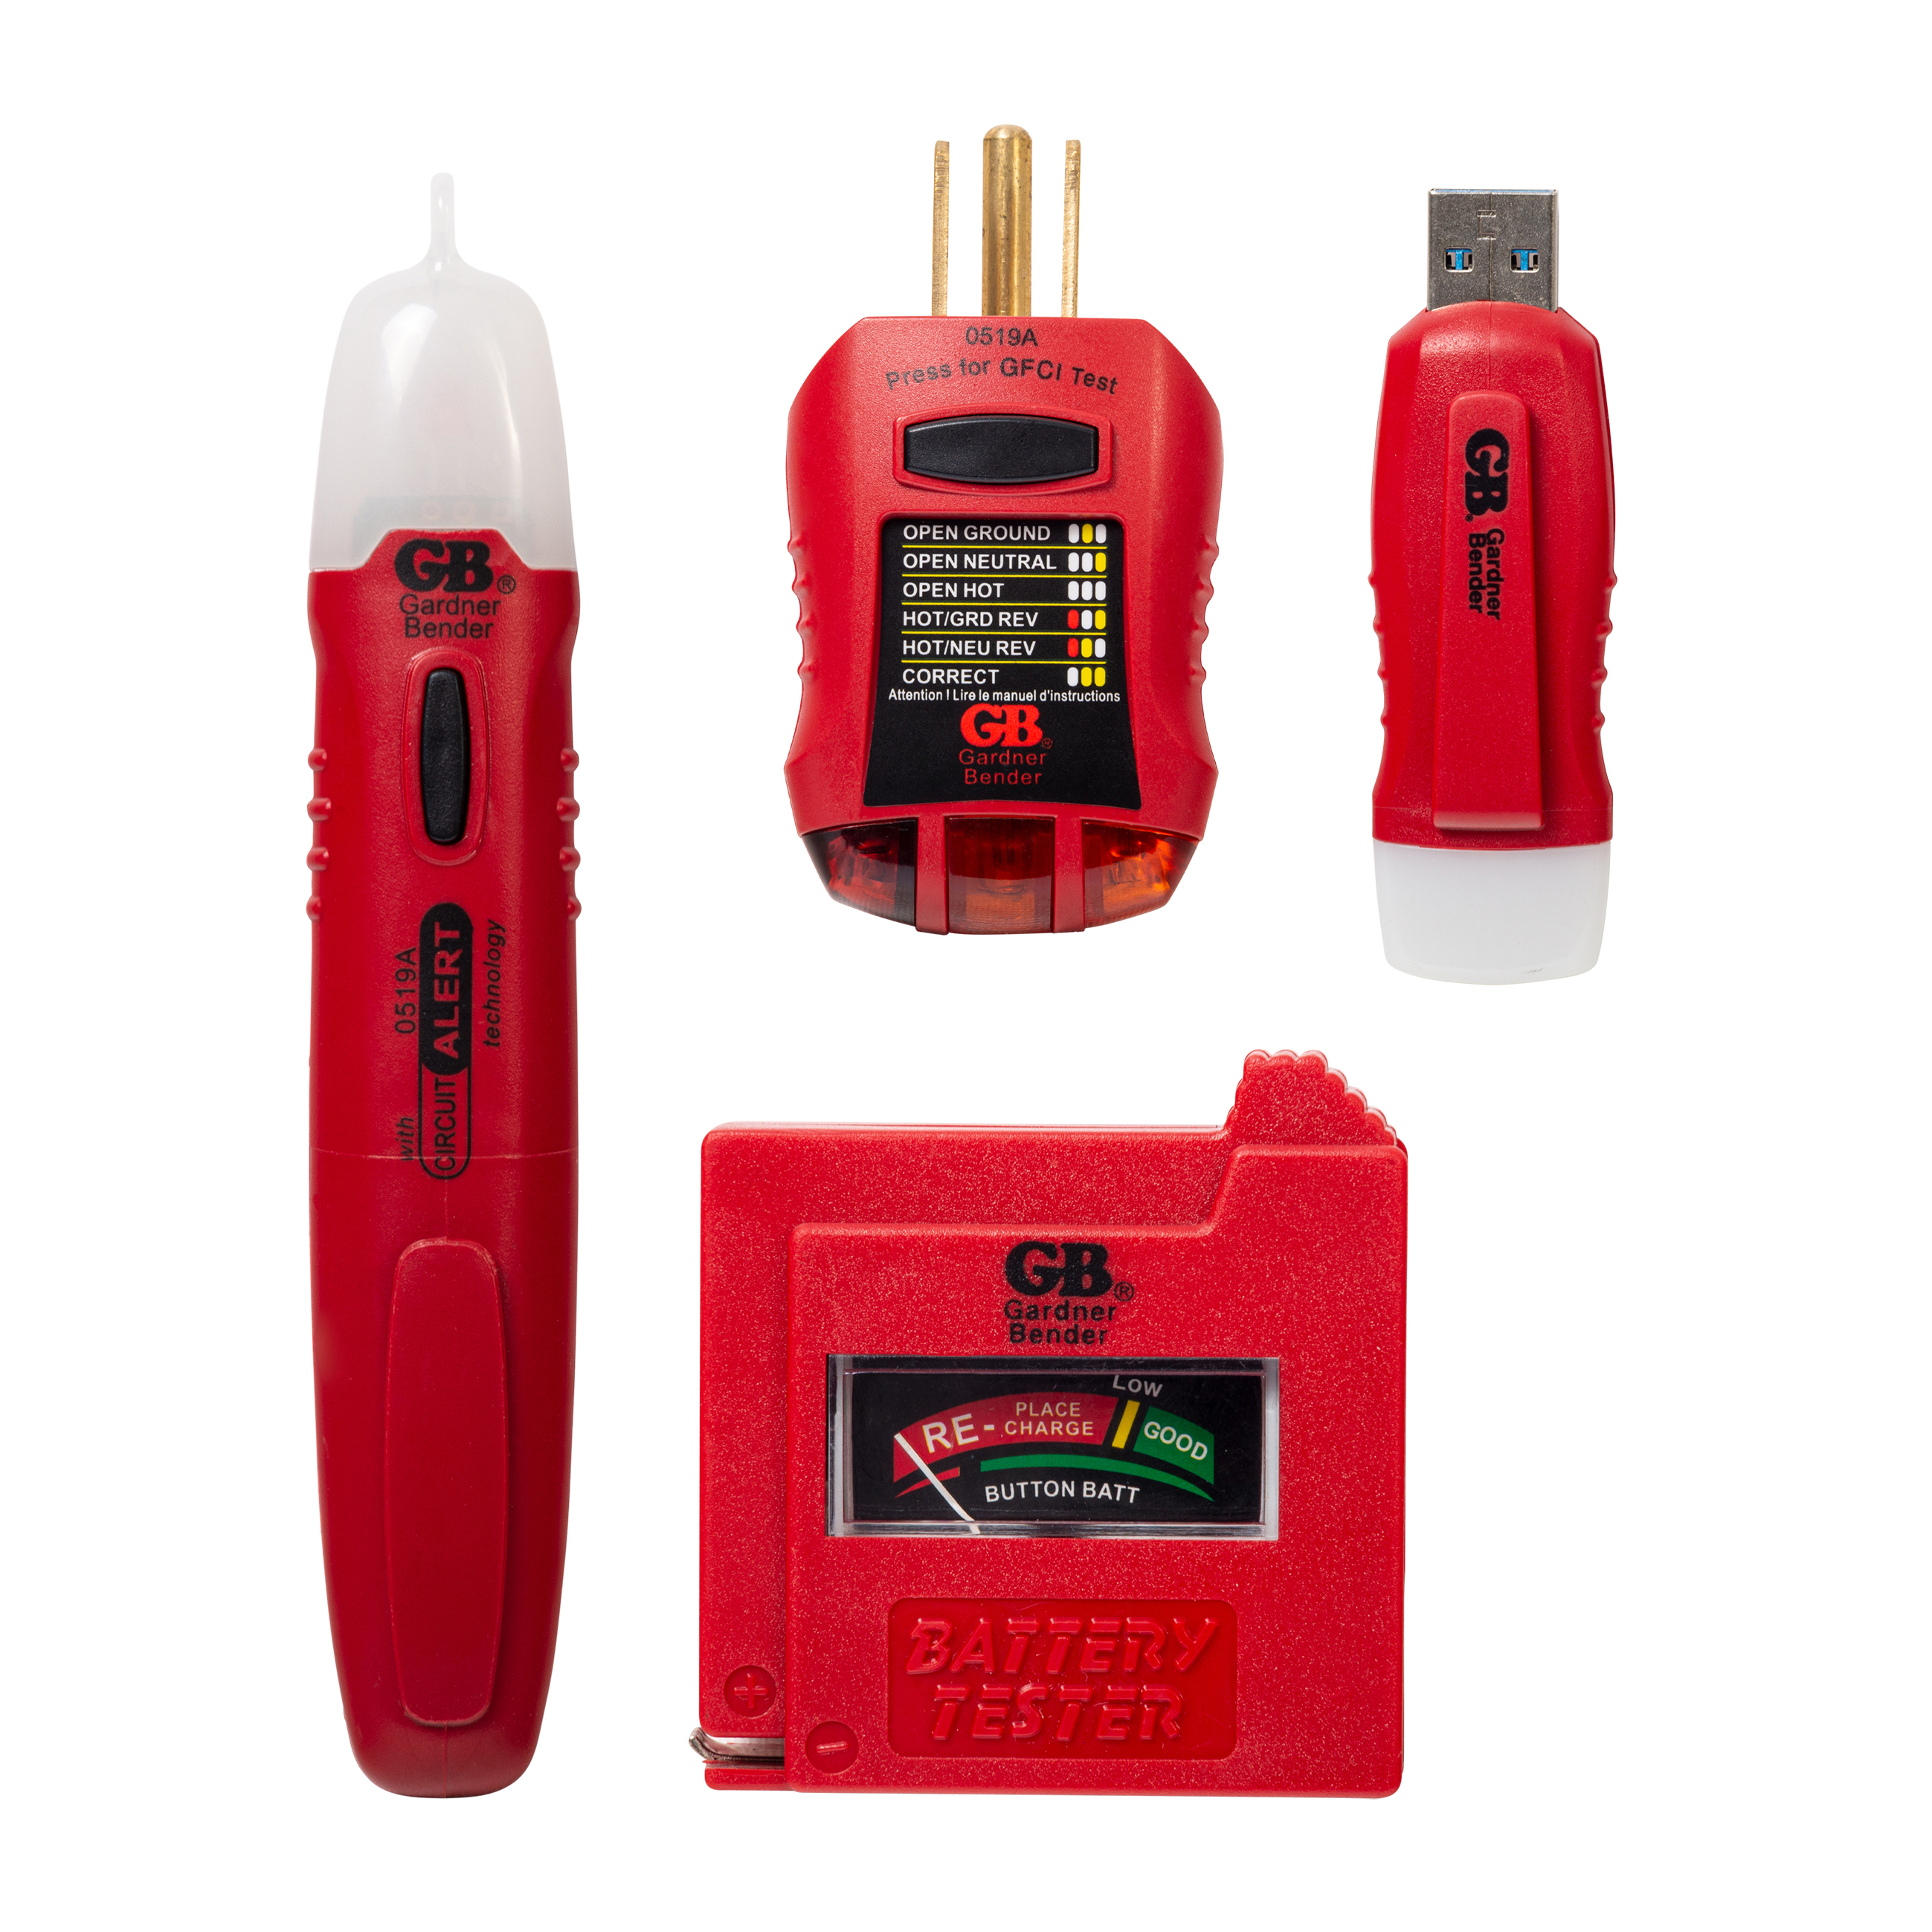 GB GK-5 Electrical Tester Kit, 4-Piece, Plastic, Red - 1